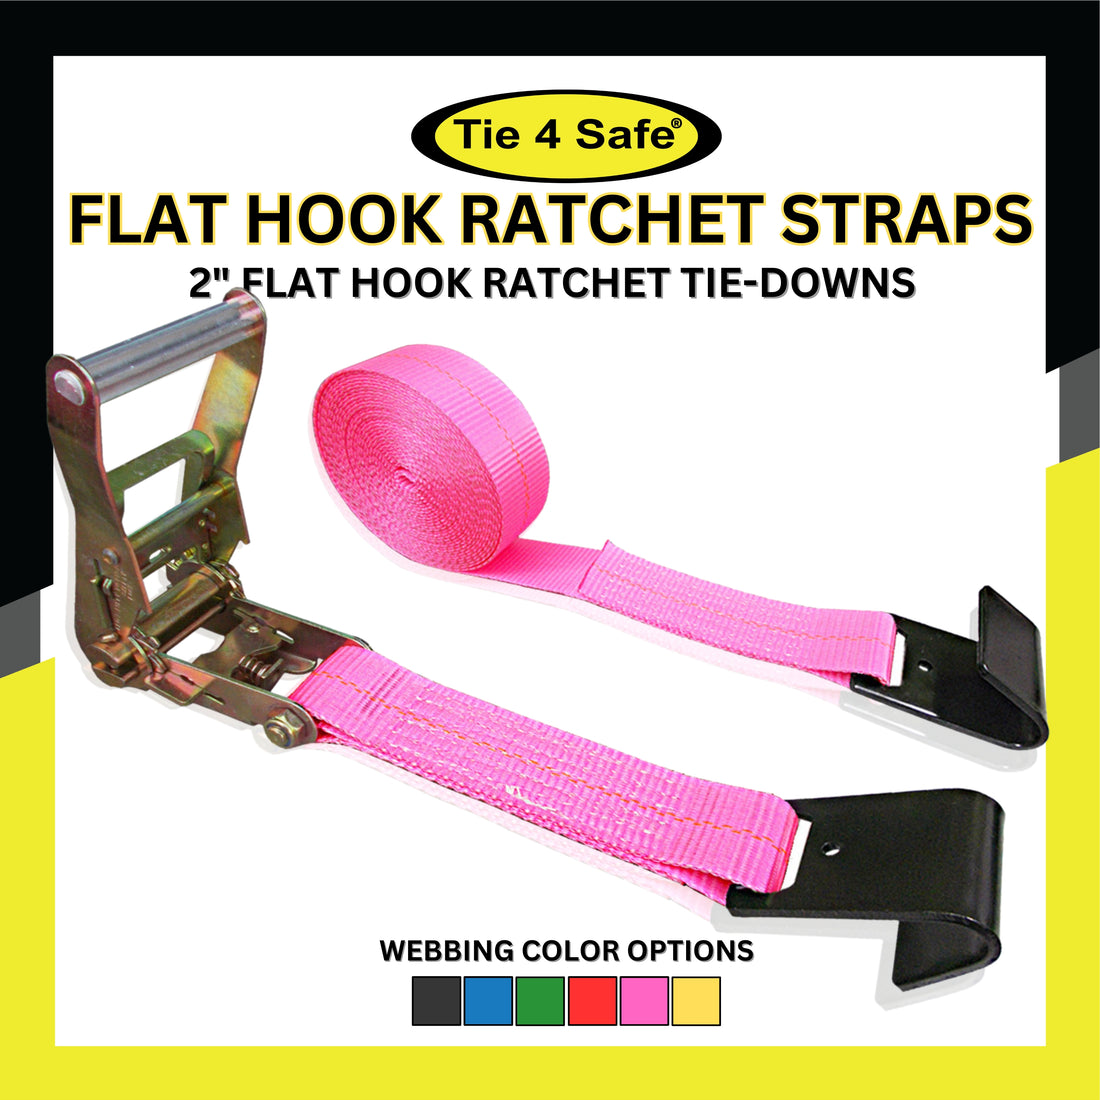 2 Heavy Duty Ratchet Tie Down Strap With Flat Tow Hooks – Tie 4 Safe